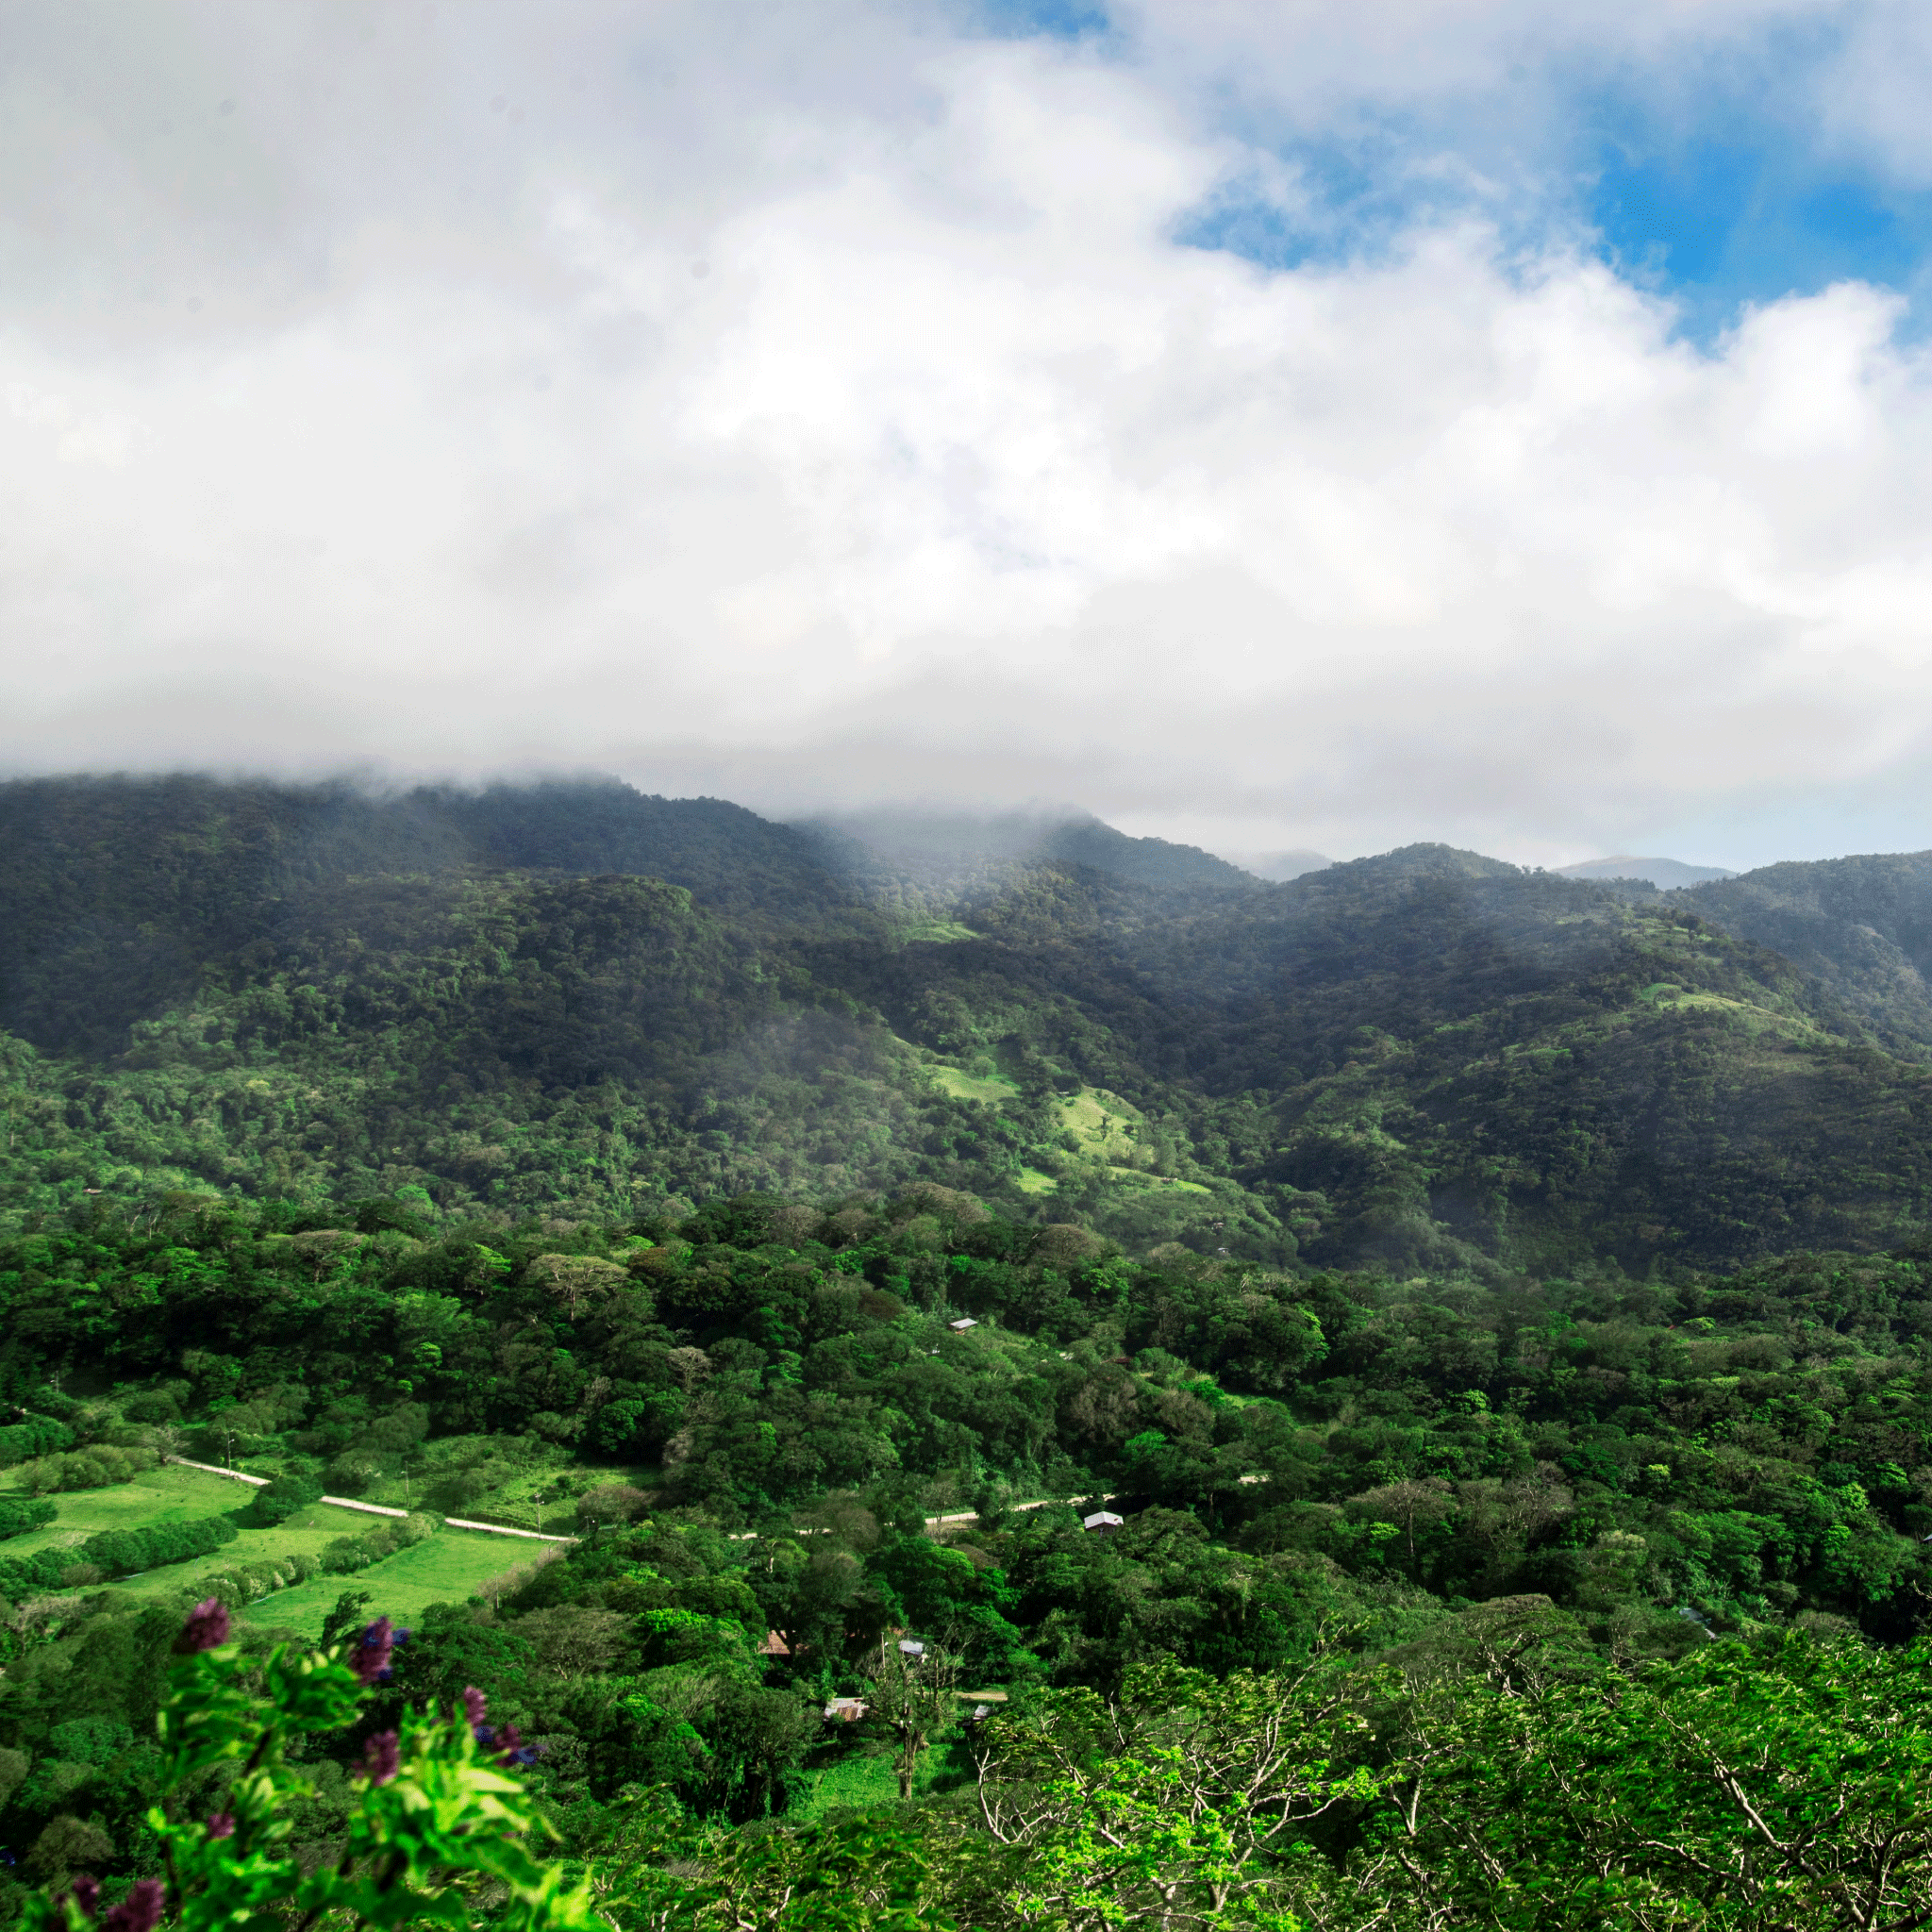 Lush green tropical forests and a partly cloudy blues sky